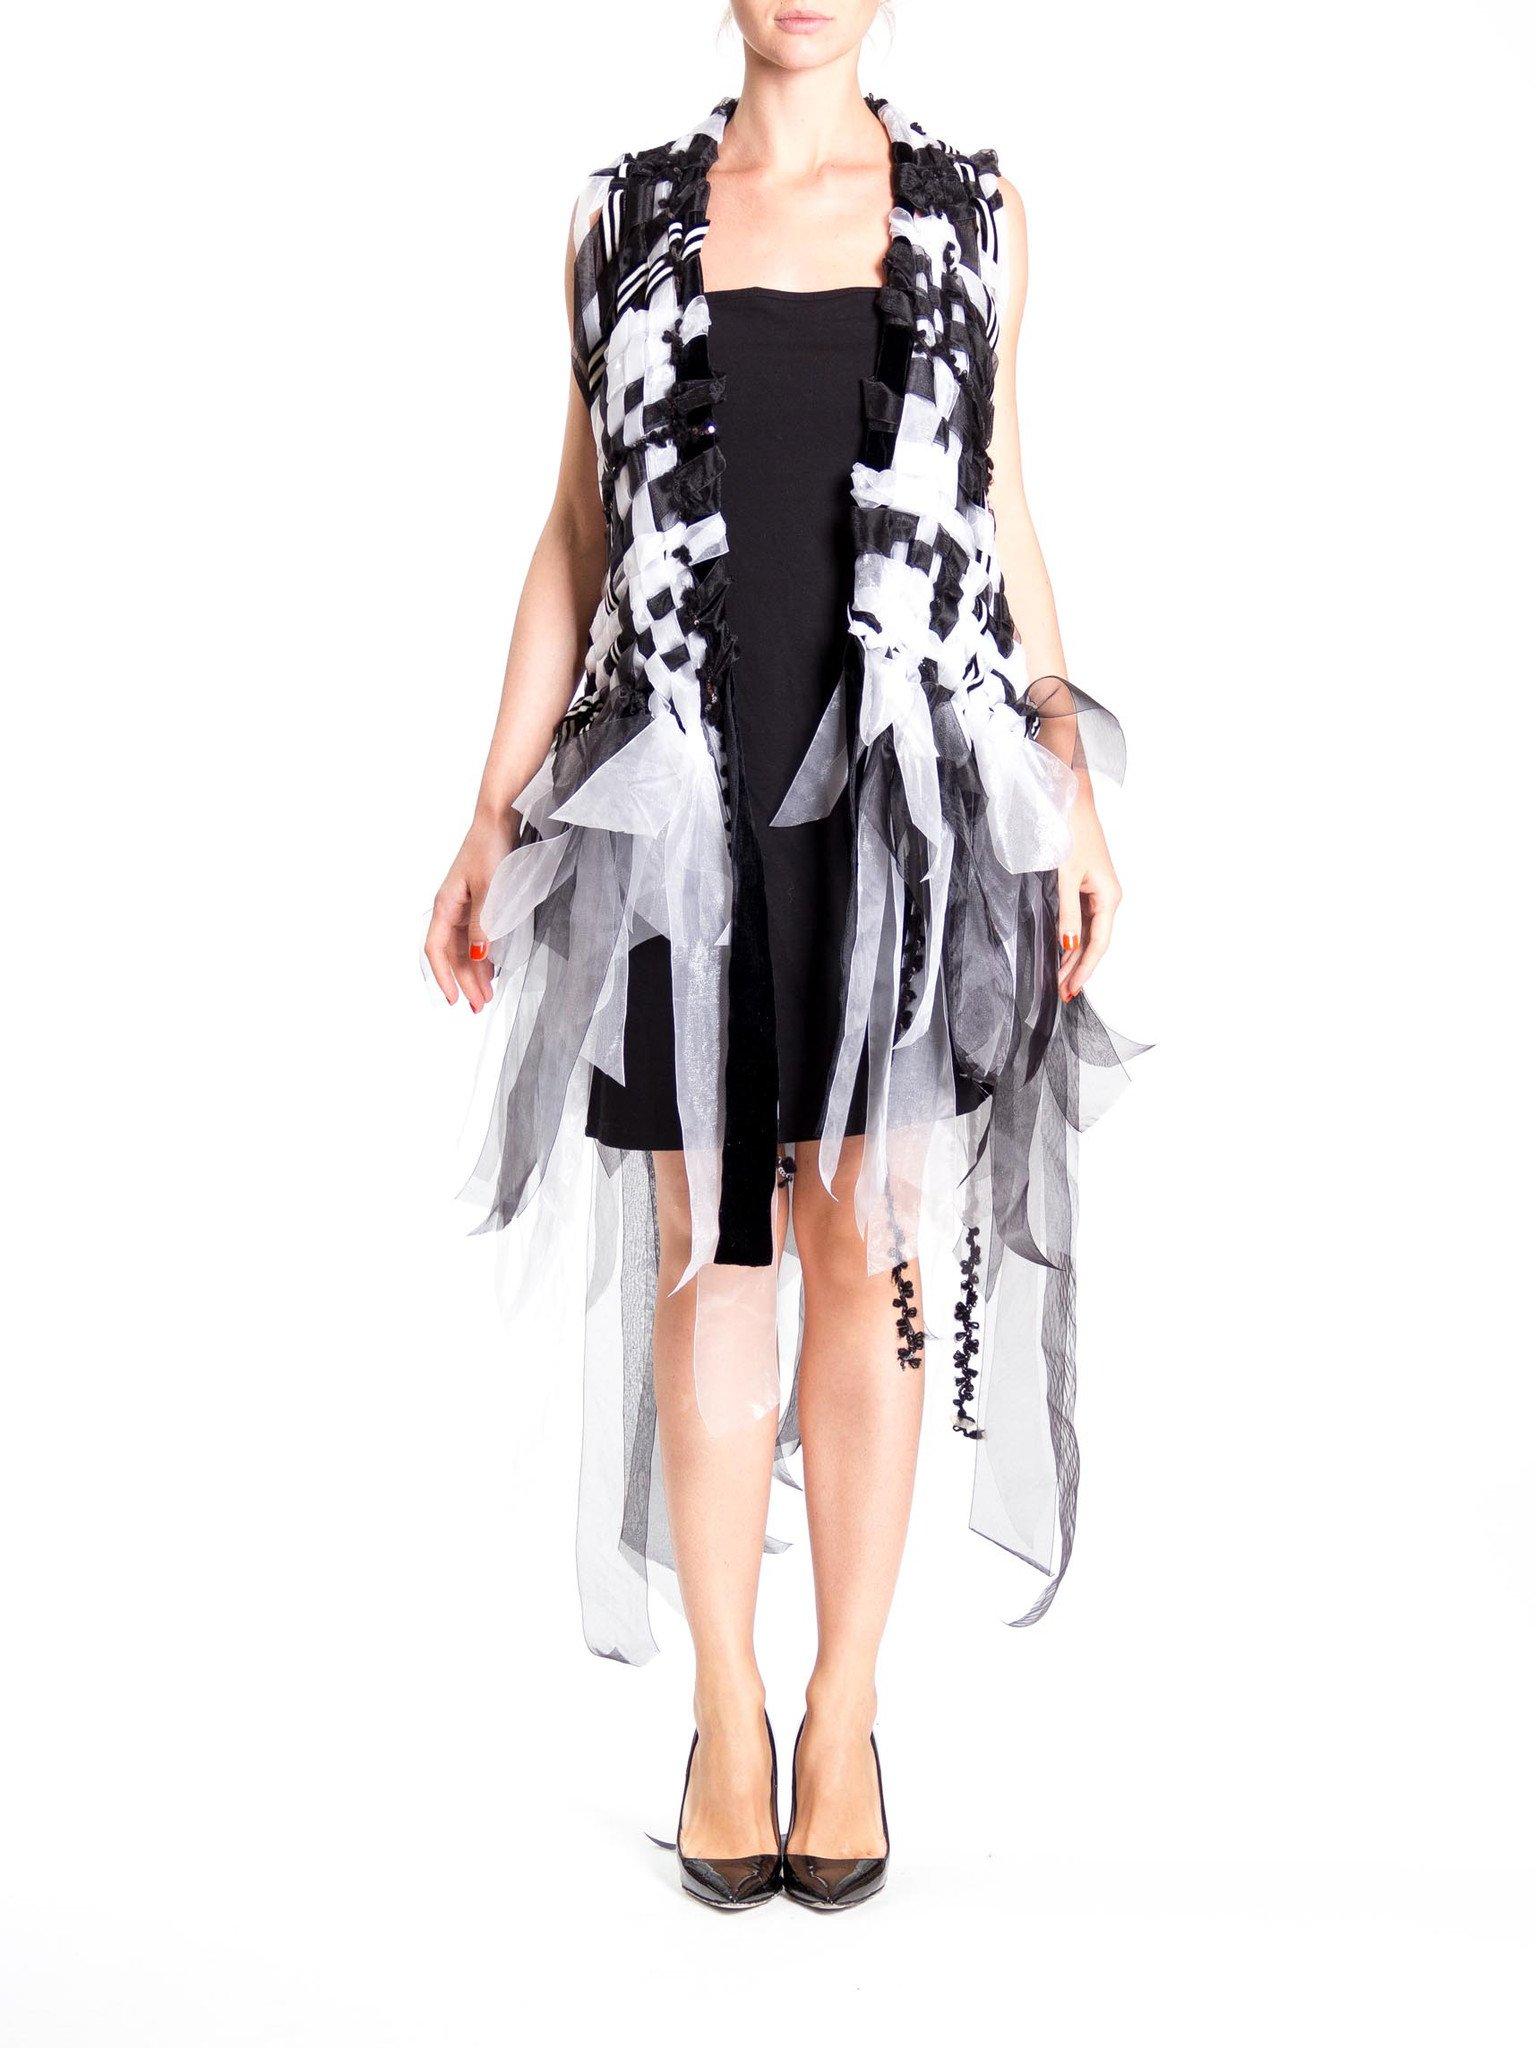 MORPHEW COLLECTION Black & White Hand Woven Ribbon  Vest With Fringe
MORPHEW COLLECTION is made entirely by hand in our NYC Ateliér of rare antique materials sourced from around the globe. Our sustainable vintage materials represent over a century